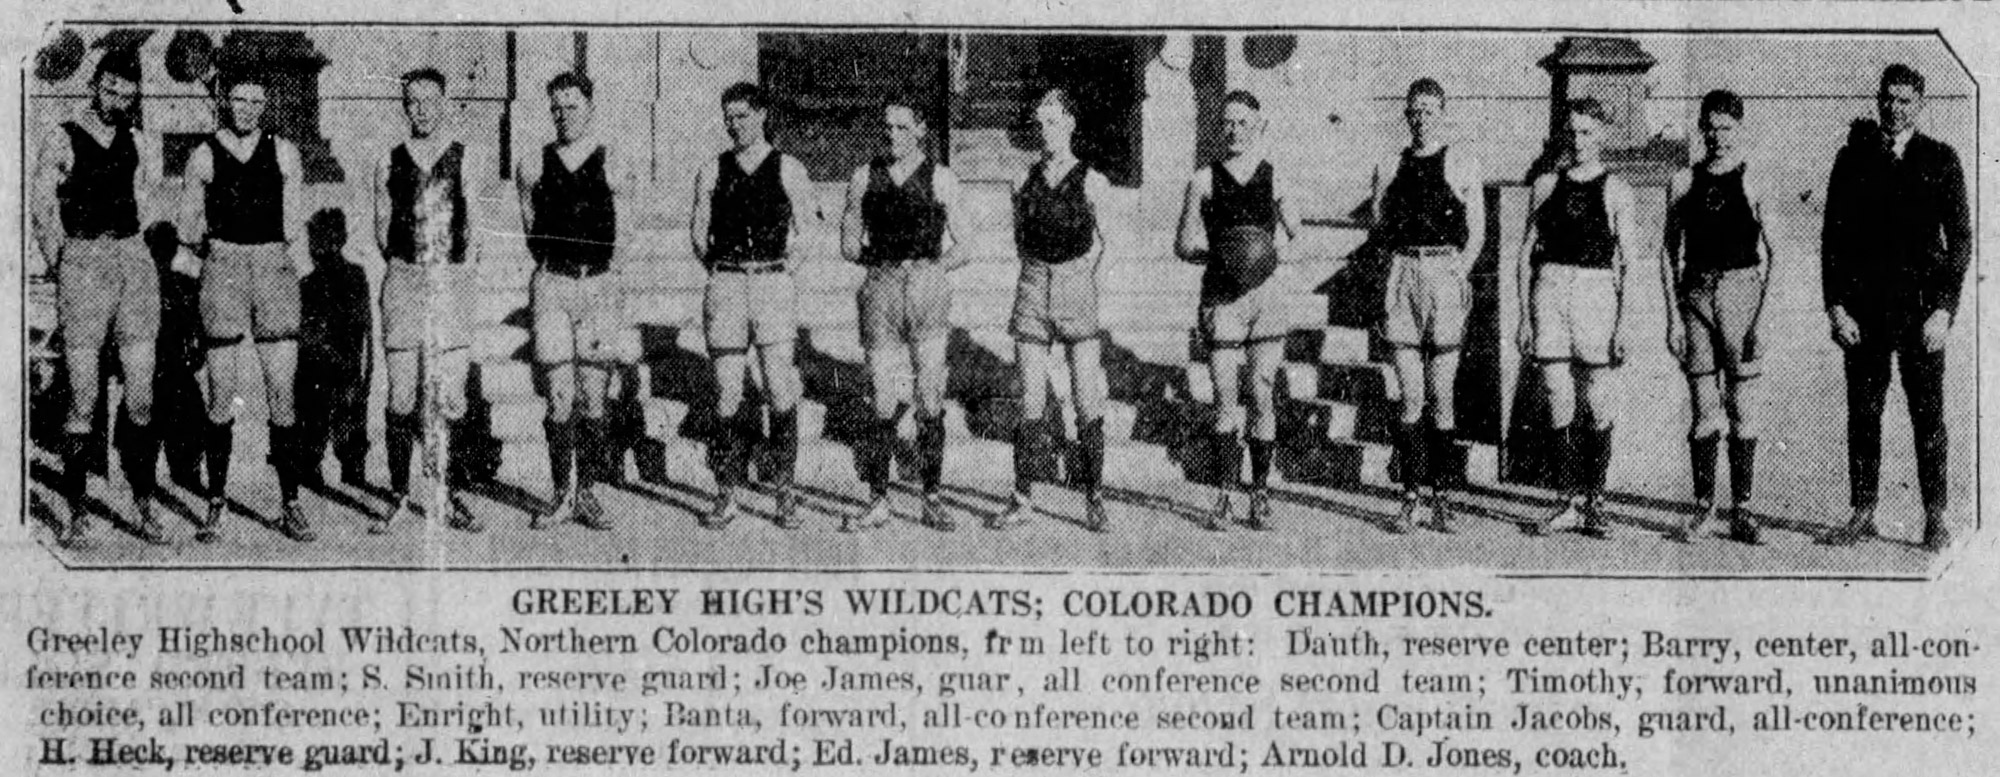 Dauth Family Archive - 1921-03-19 - The Fort Collins Courier - June Dauth Basketball Photo